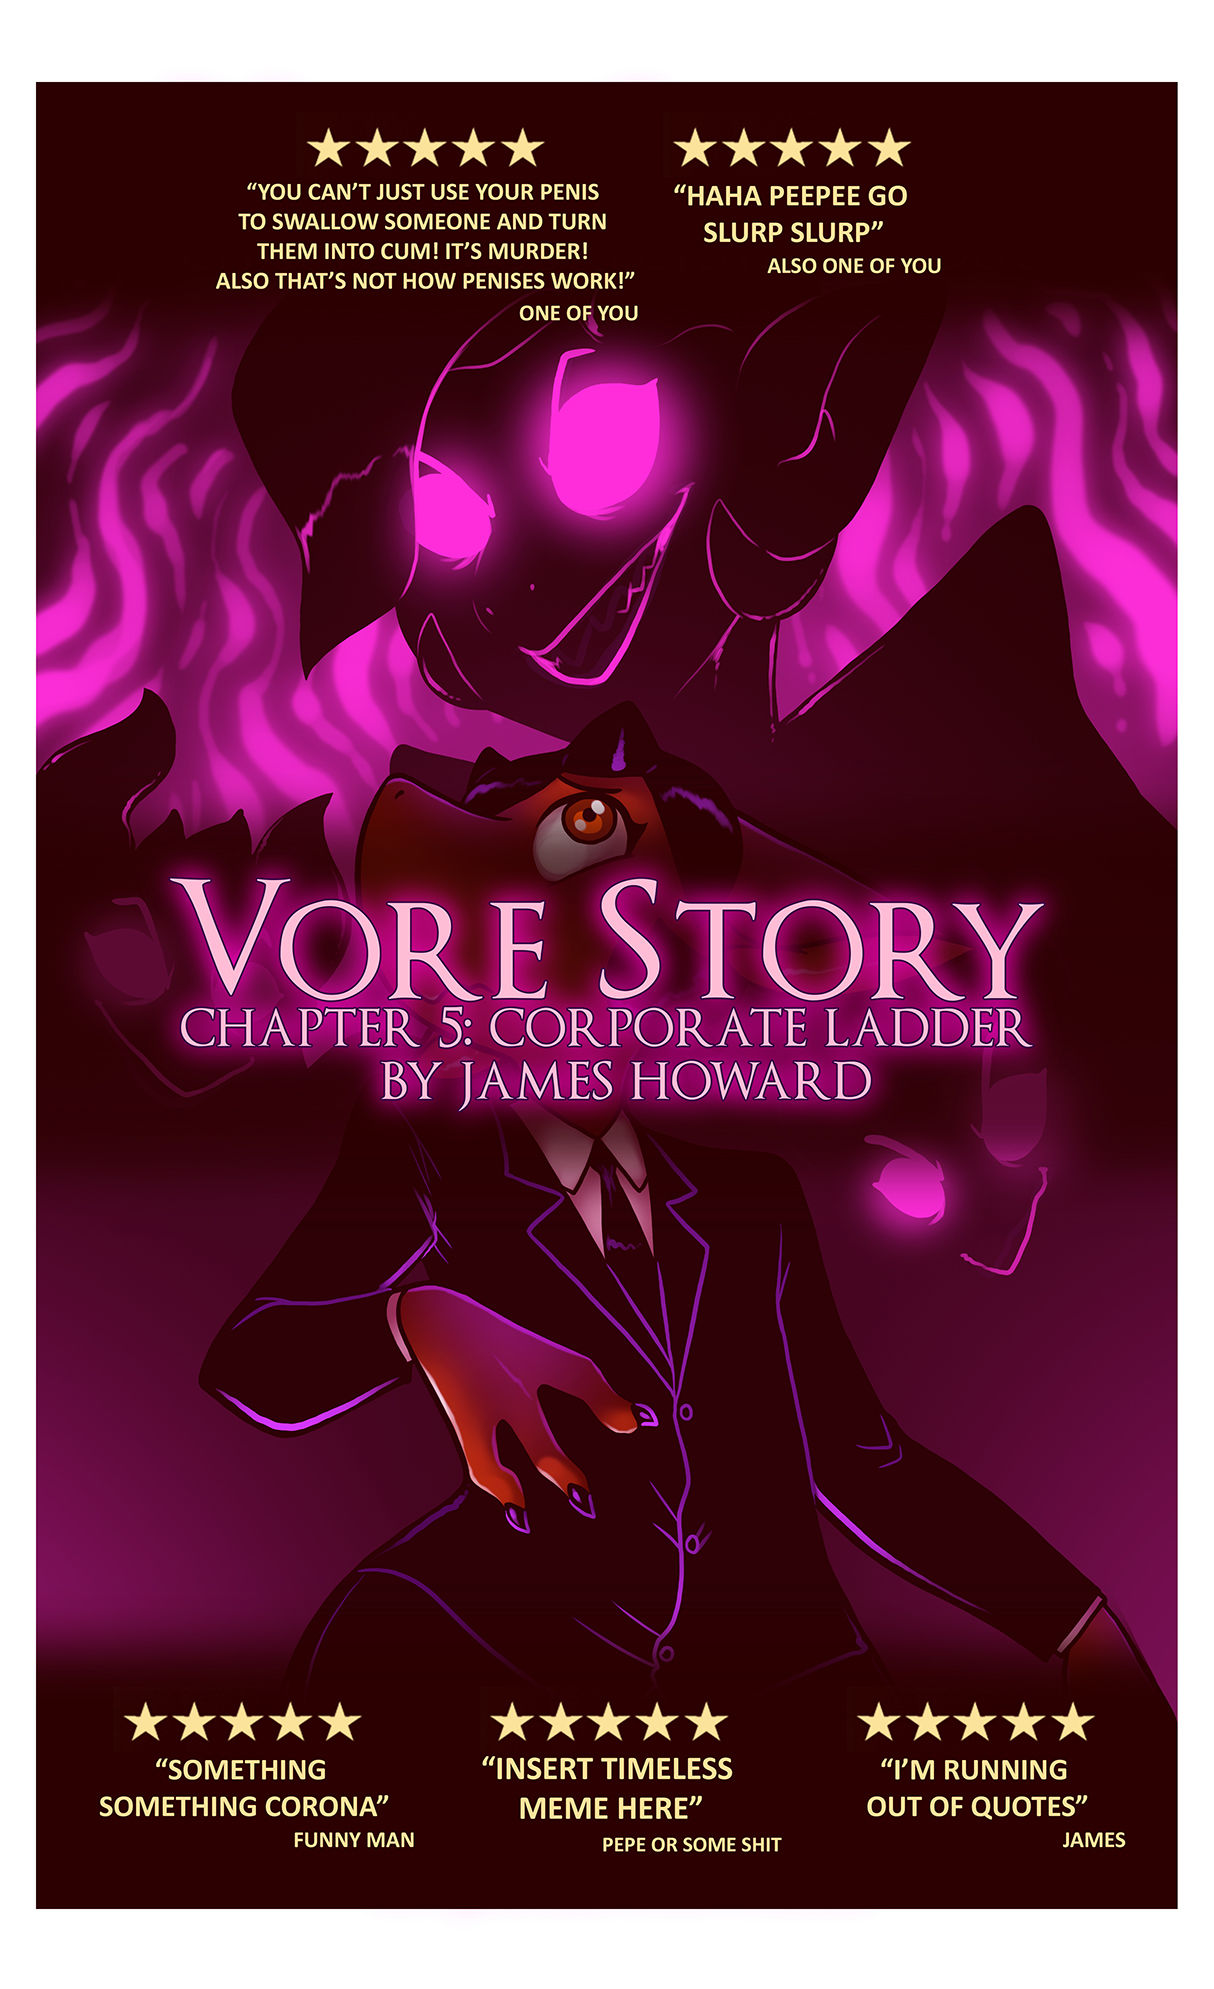 1863877 main Vore Story Chapter 4 Corporate Ladder RP 04 COVER TEASER